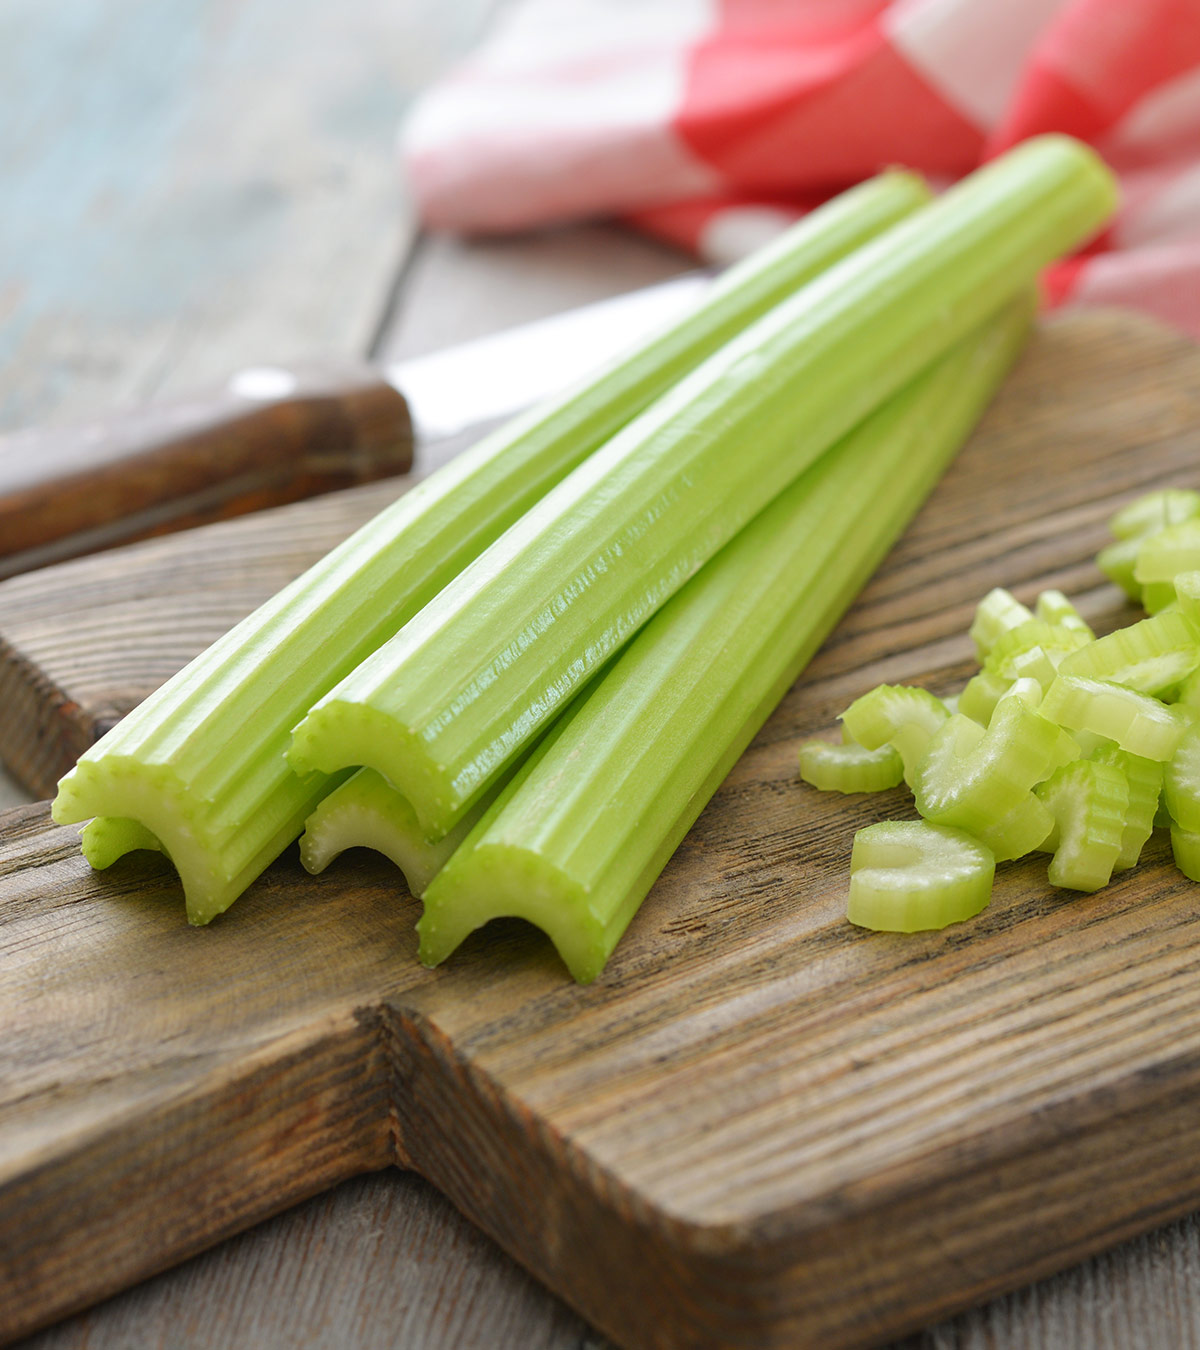 Is It Safe To Eat Celery During Pregnancy?